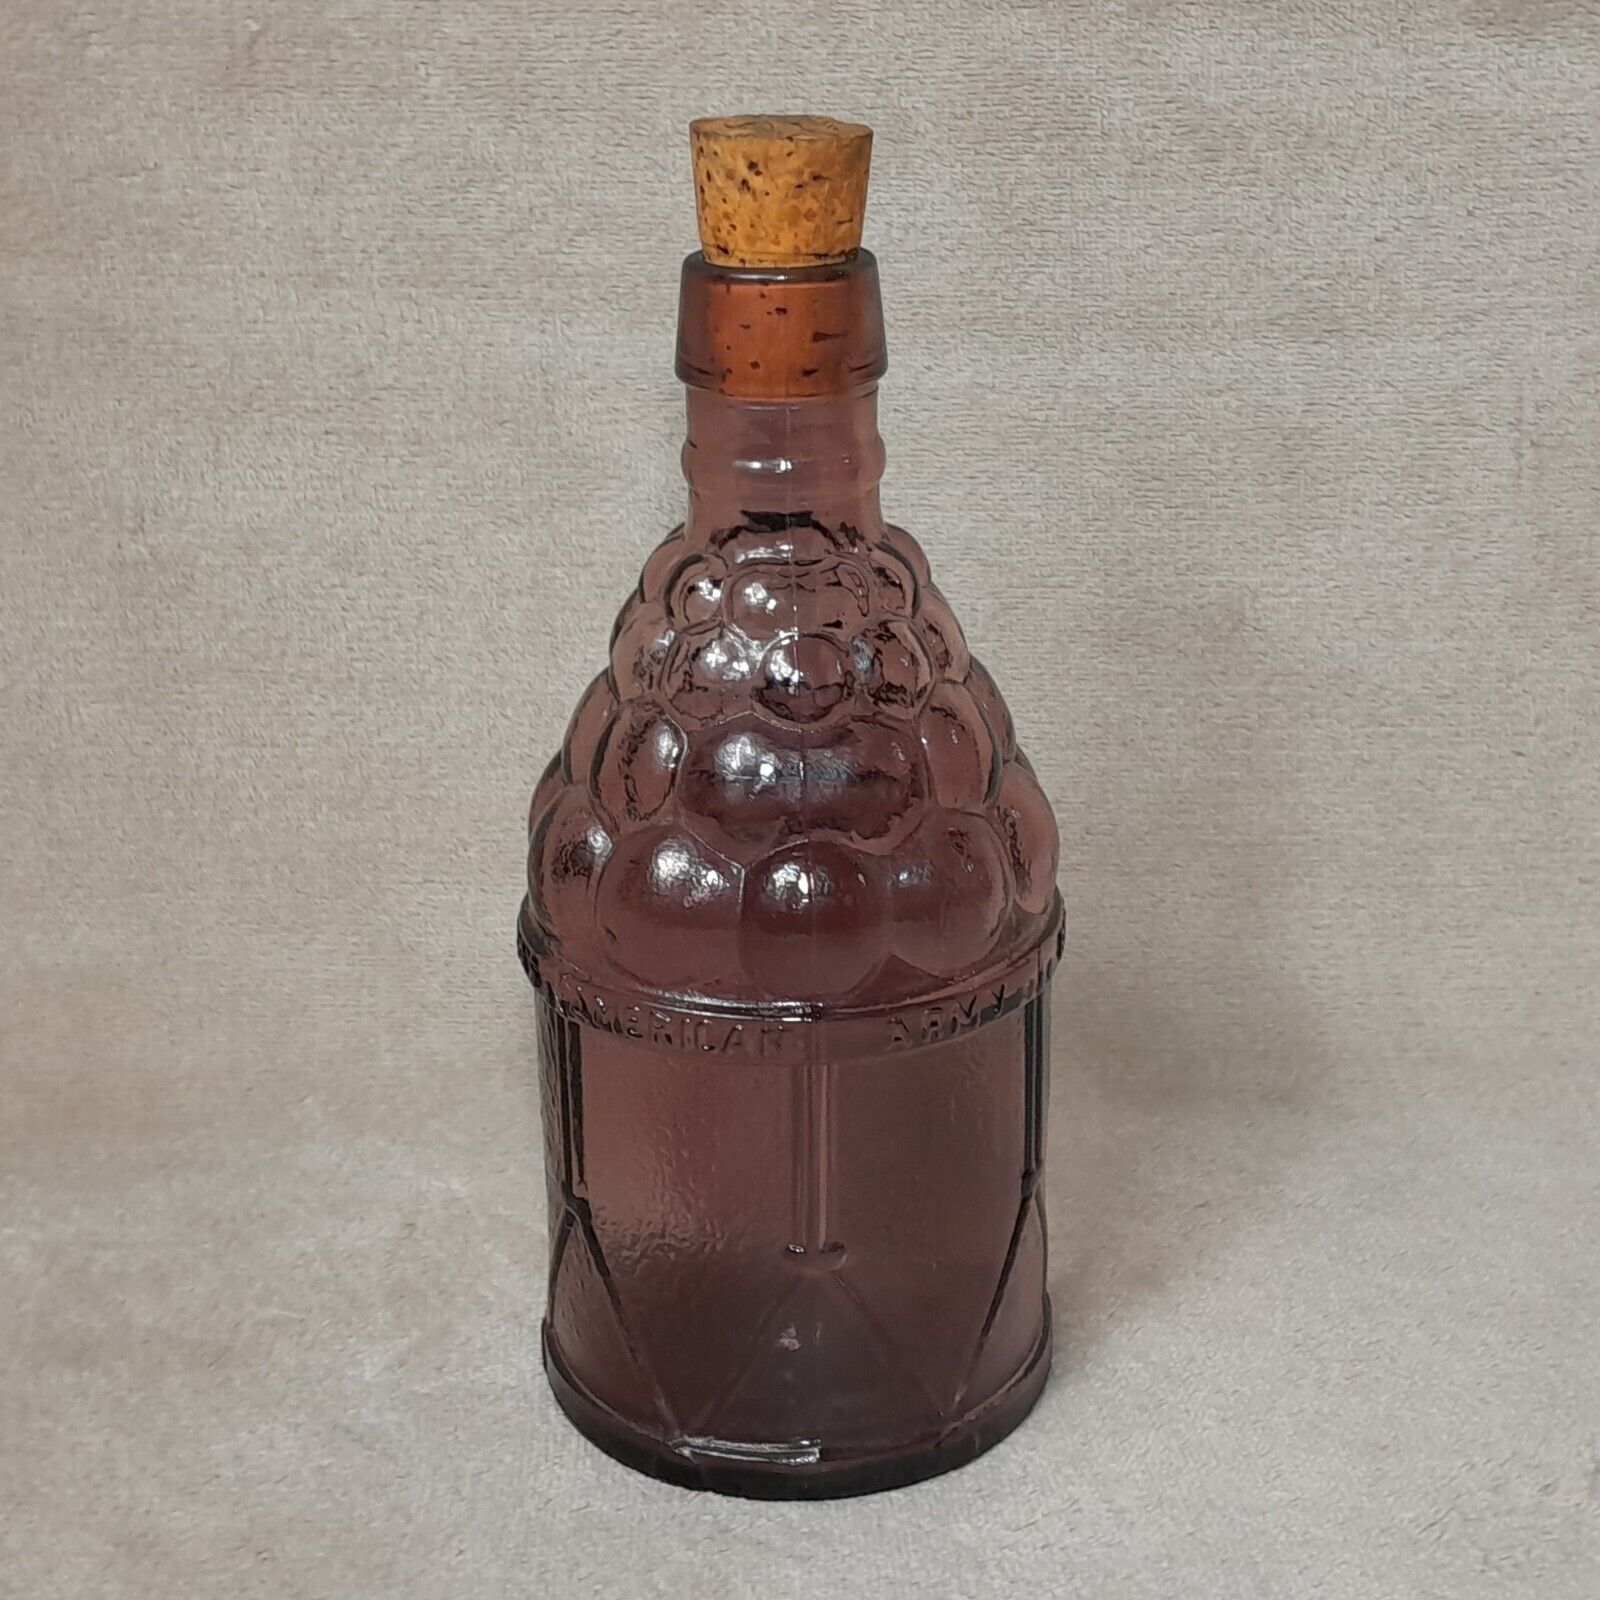 McGivers American Army Bitters Bottle With Cork Purple Vintage Wheaton NJ